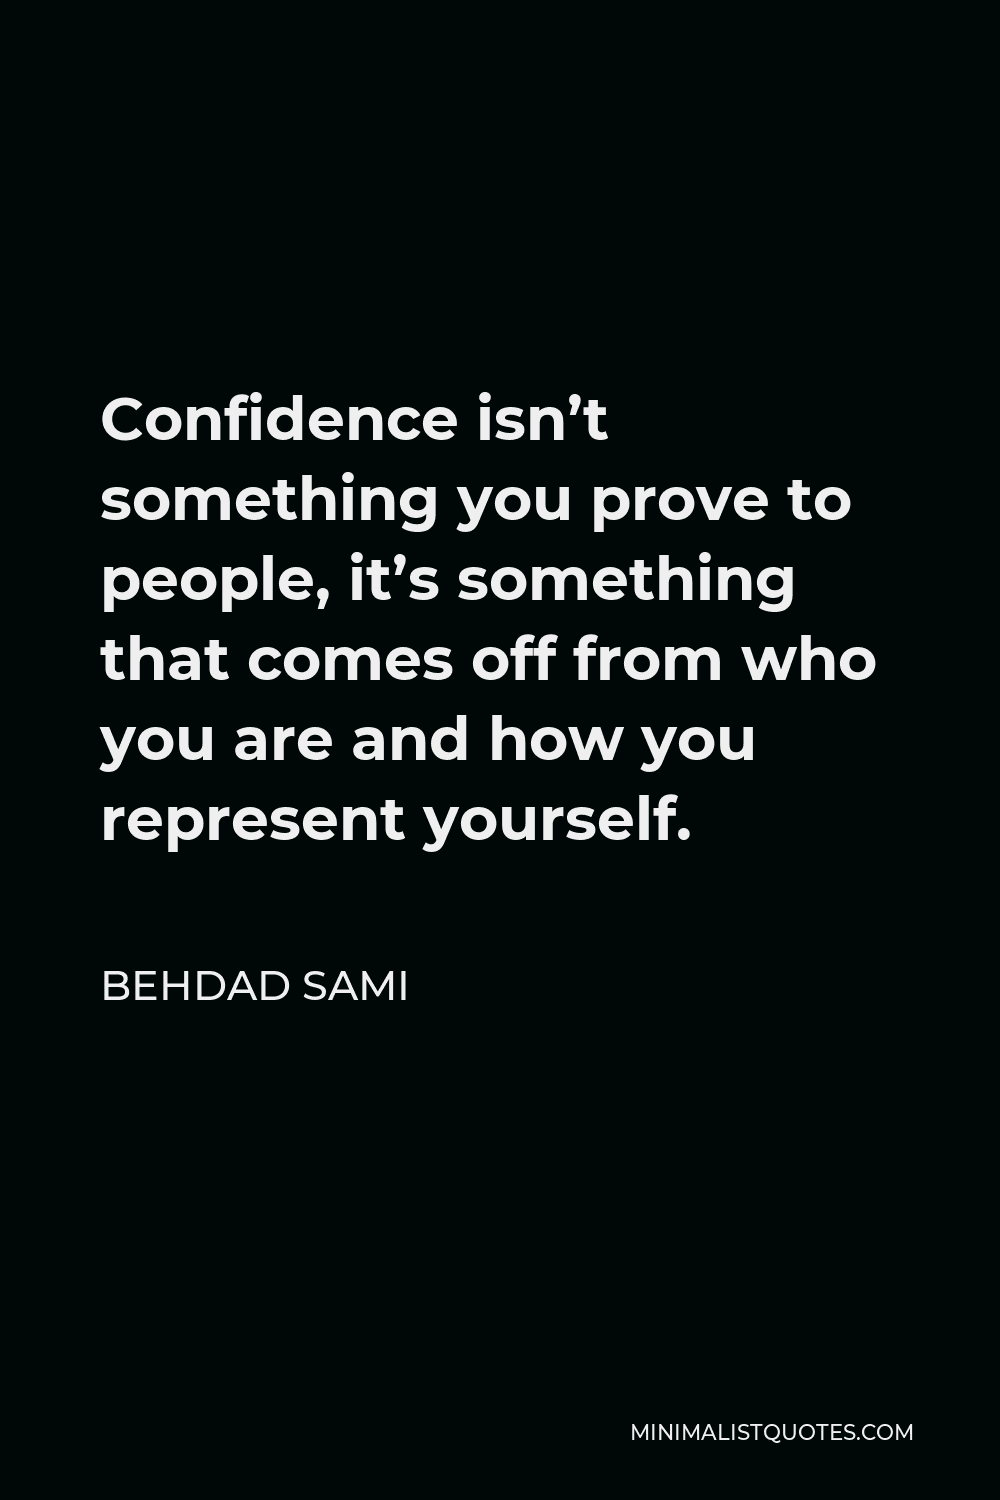 Behdad Sami Quote - Confidence isn’t something you prove to people, it’s something that comes off from who you are and how you represent yourself.